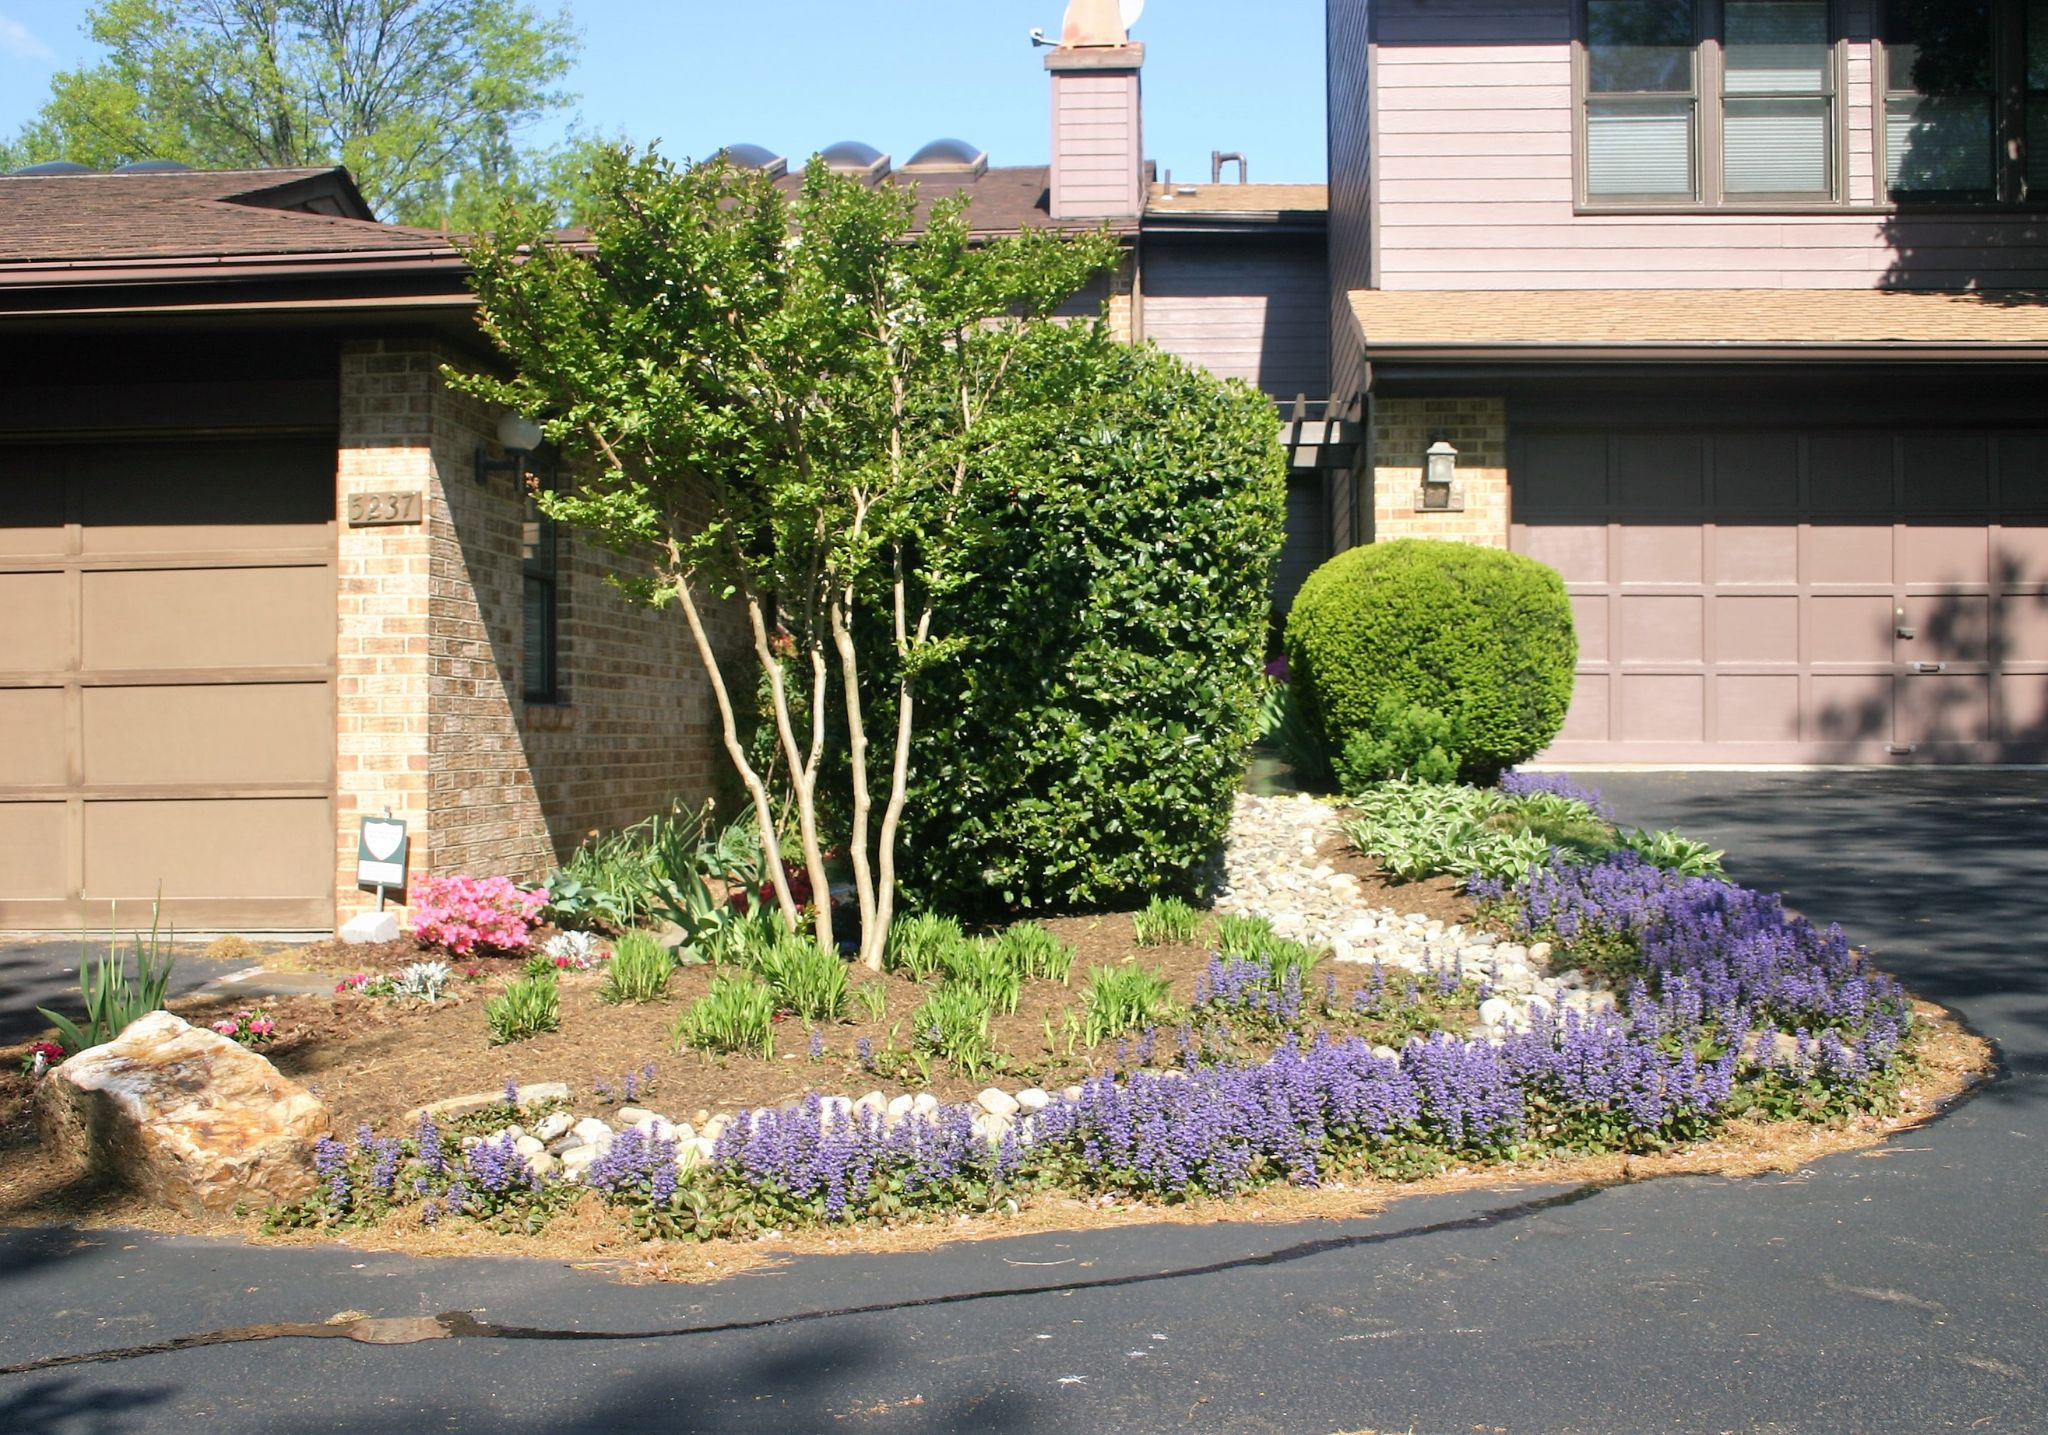 Beautiful garden at garage entrance with trees, shrubs, flowers, and jasmines